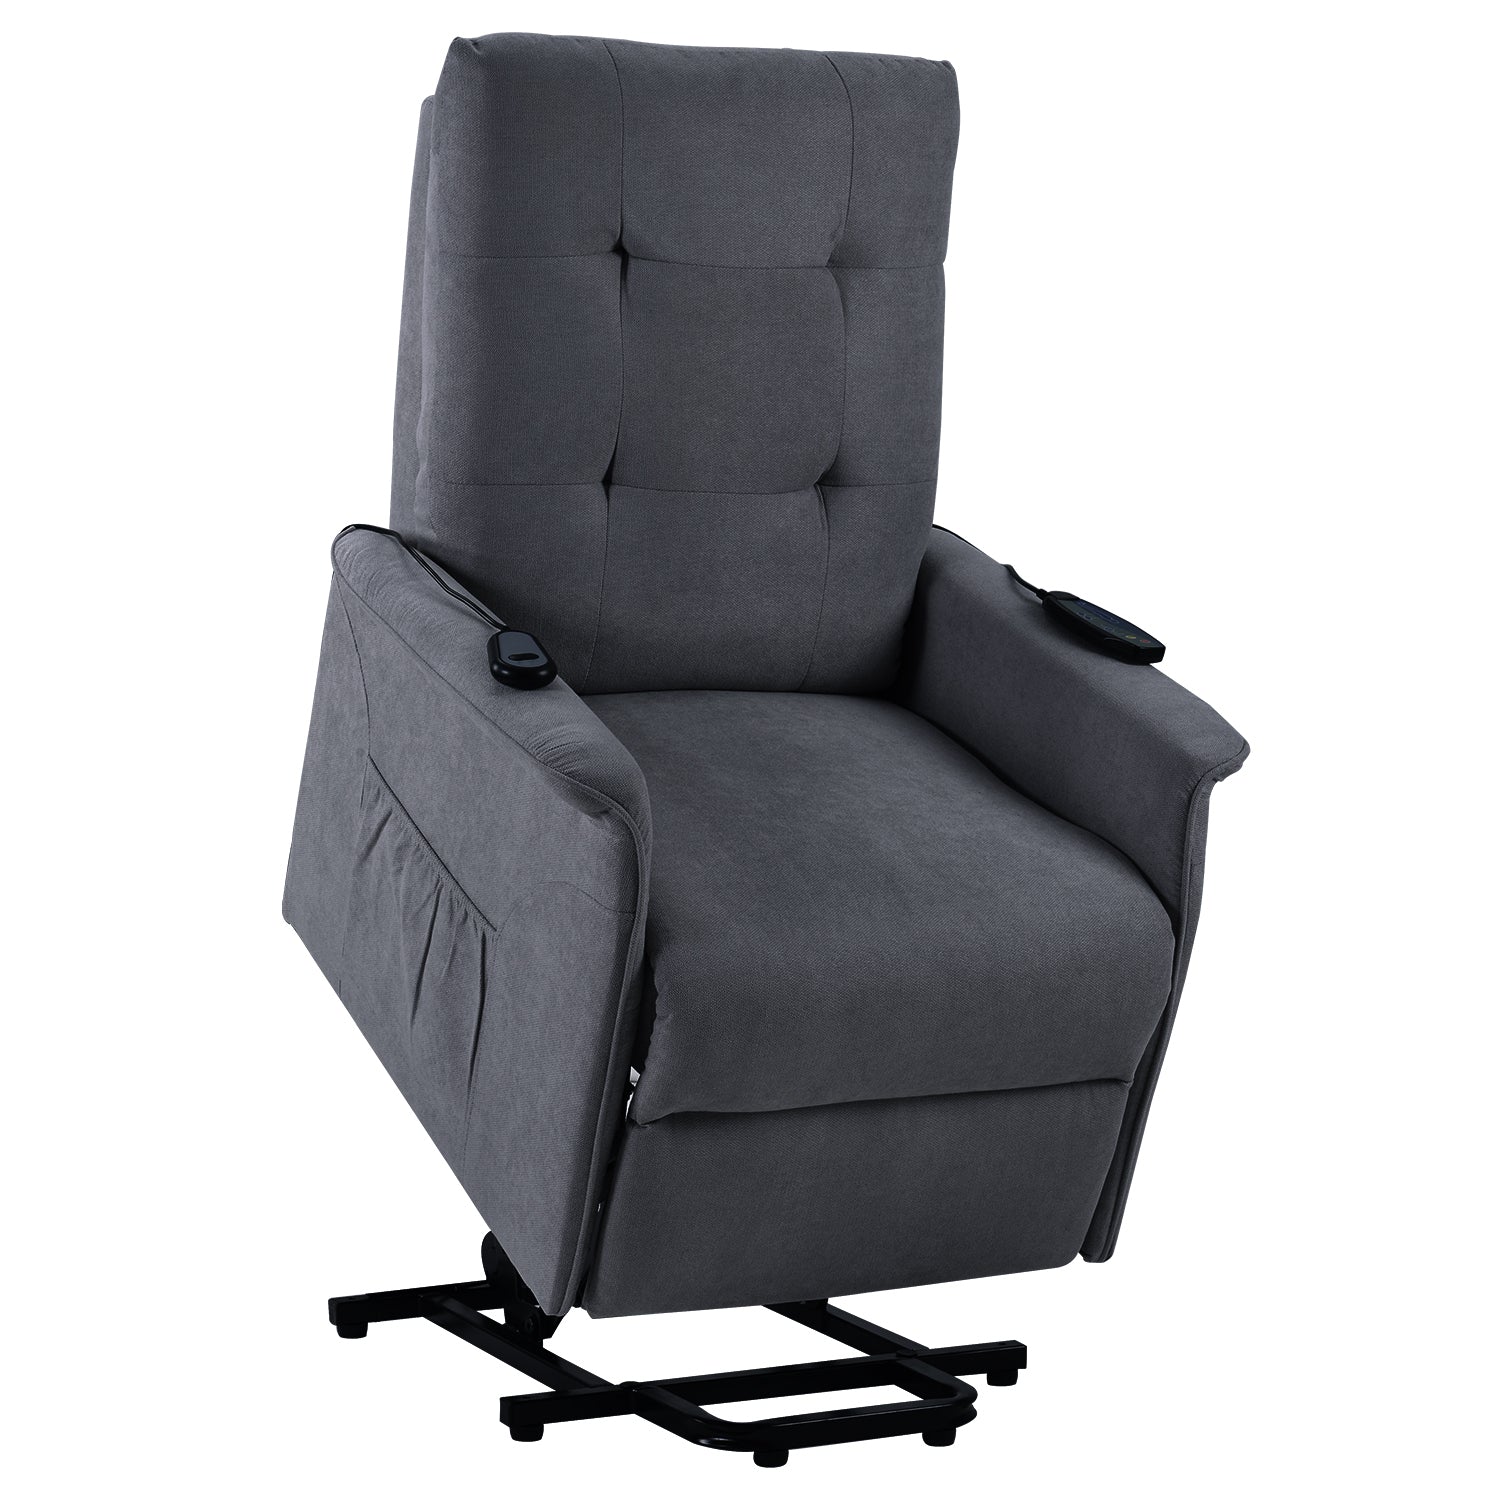 Adjustable Power Lift Recliner Chair for Elderly By: Alabama Beds